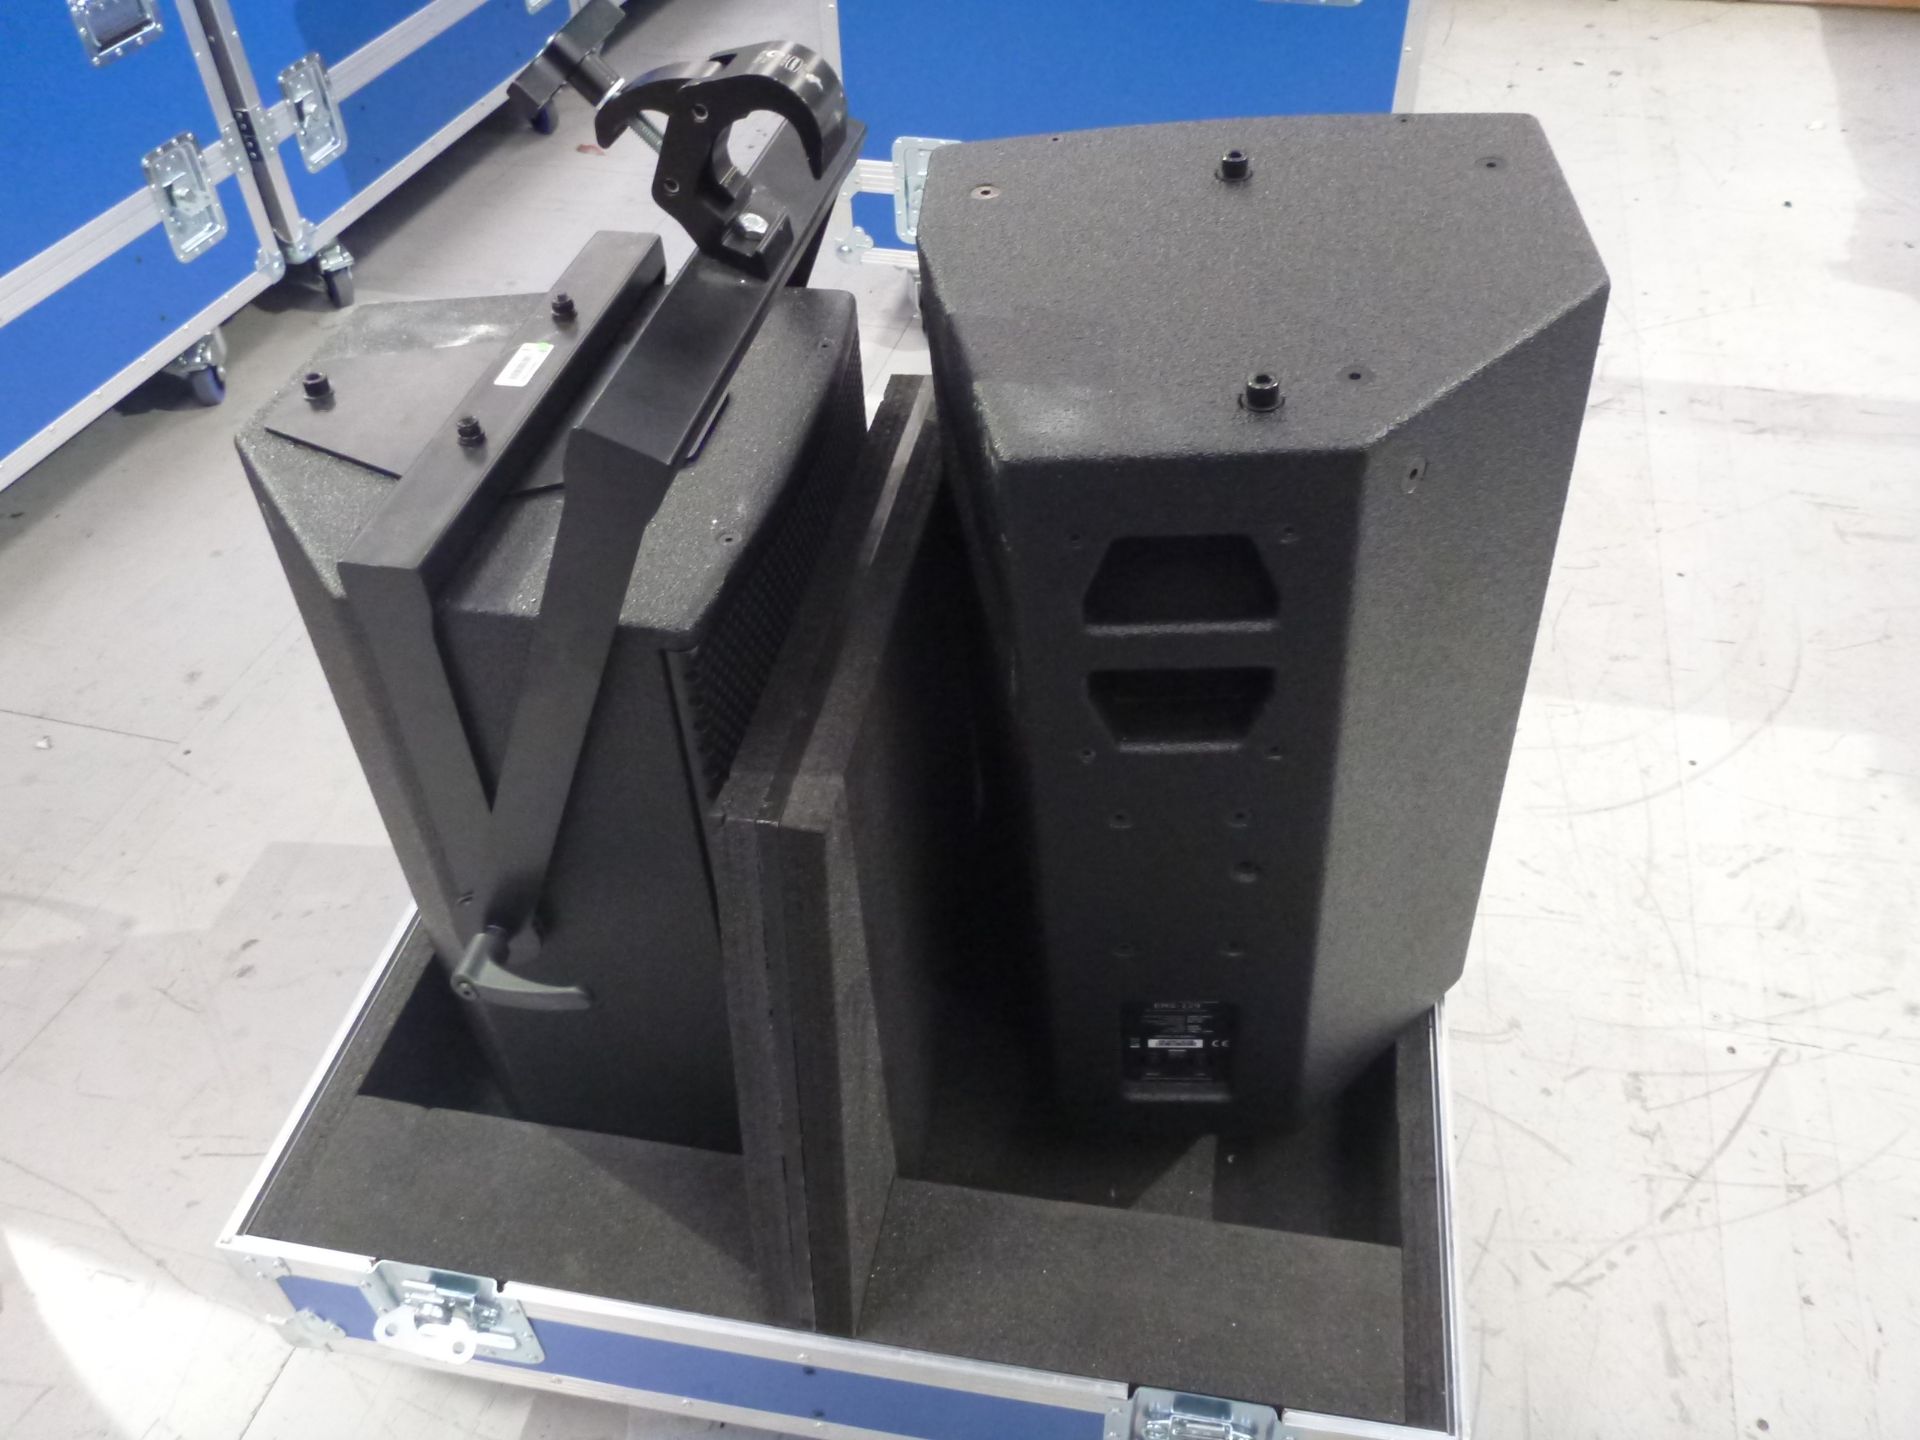 EM Acoustics EMS-129 Wide Dispersion Passive Loudspeakers (Pair) In flight case with 1 x flying - Image 3 of 7